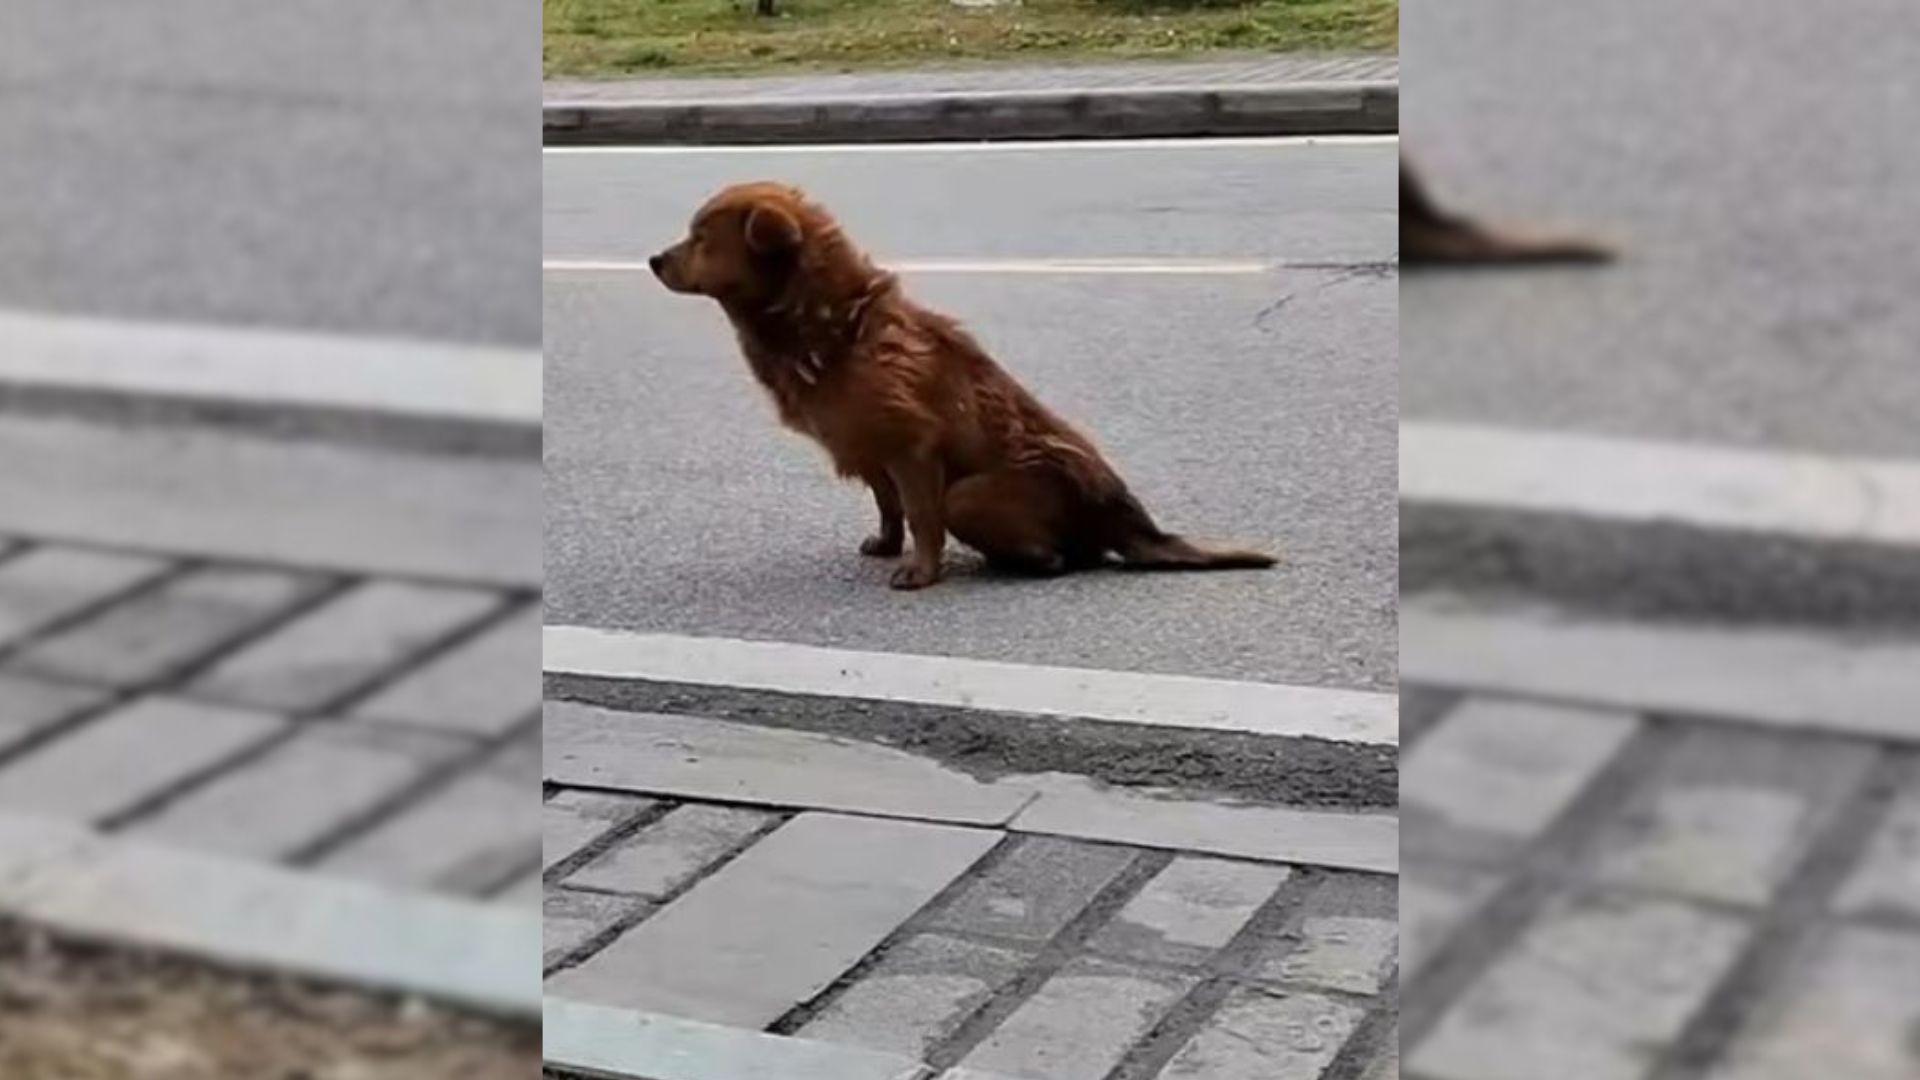 Rescuers Stumble Upon A Dog On A Deserted Road, Then Uncover His Shocking Condition